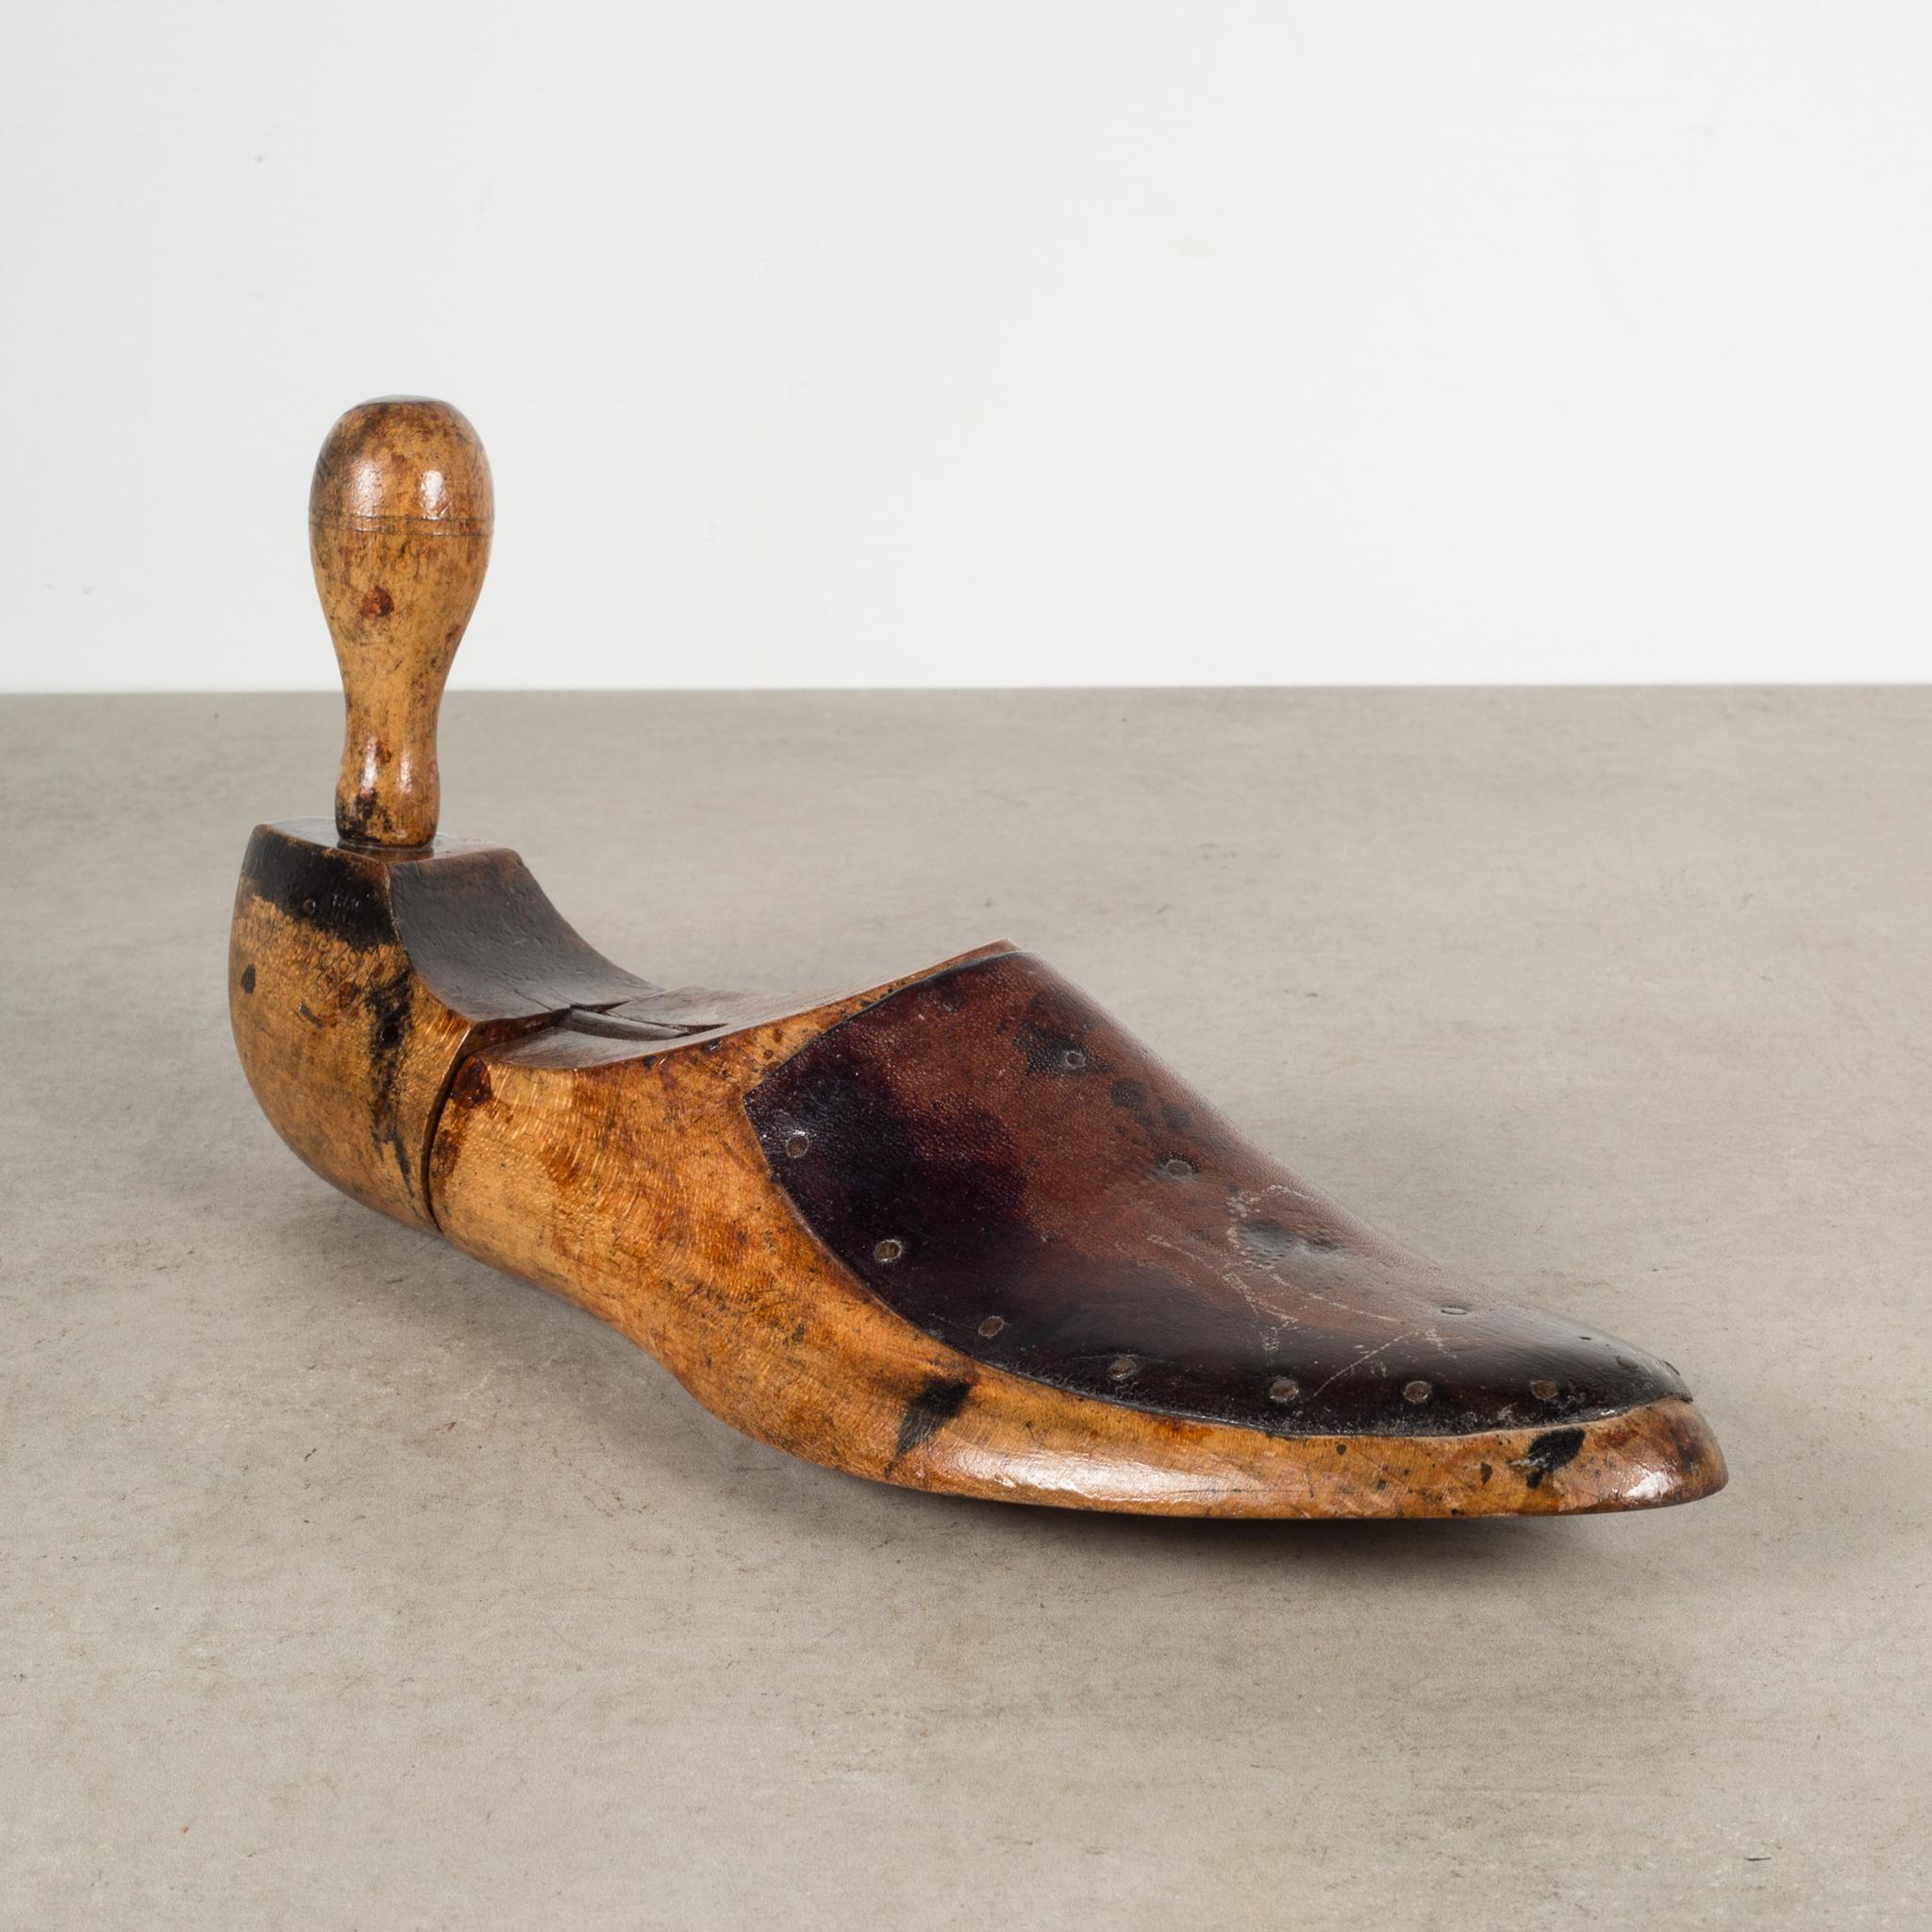 About

Decorative only.

A collection of 17 original cobbler's wooden shoe forms. All singles. One is topped with leather. Finished in and oil and paste wax. Shellaced. They have retained their original finish and have the appropriate wear.

Creator